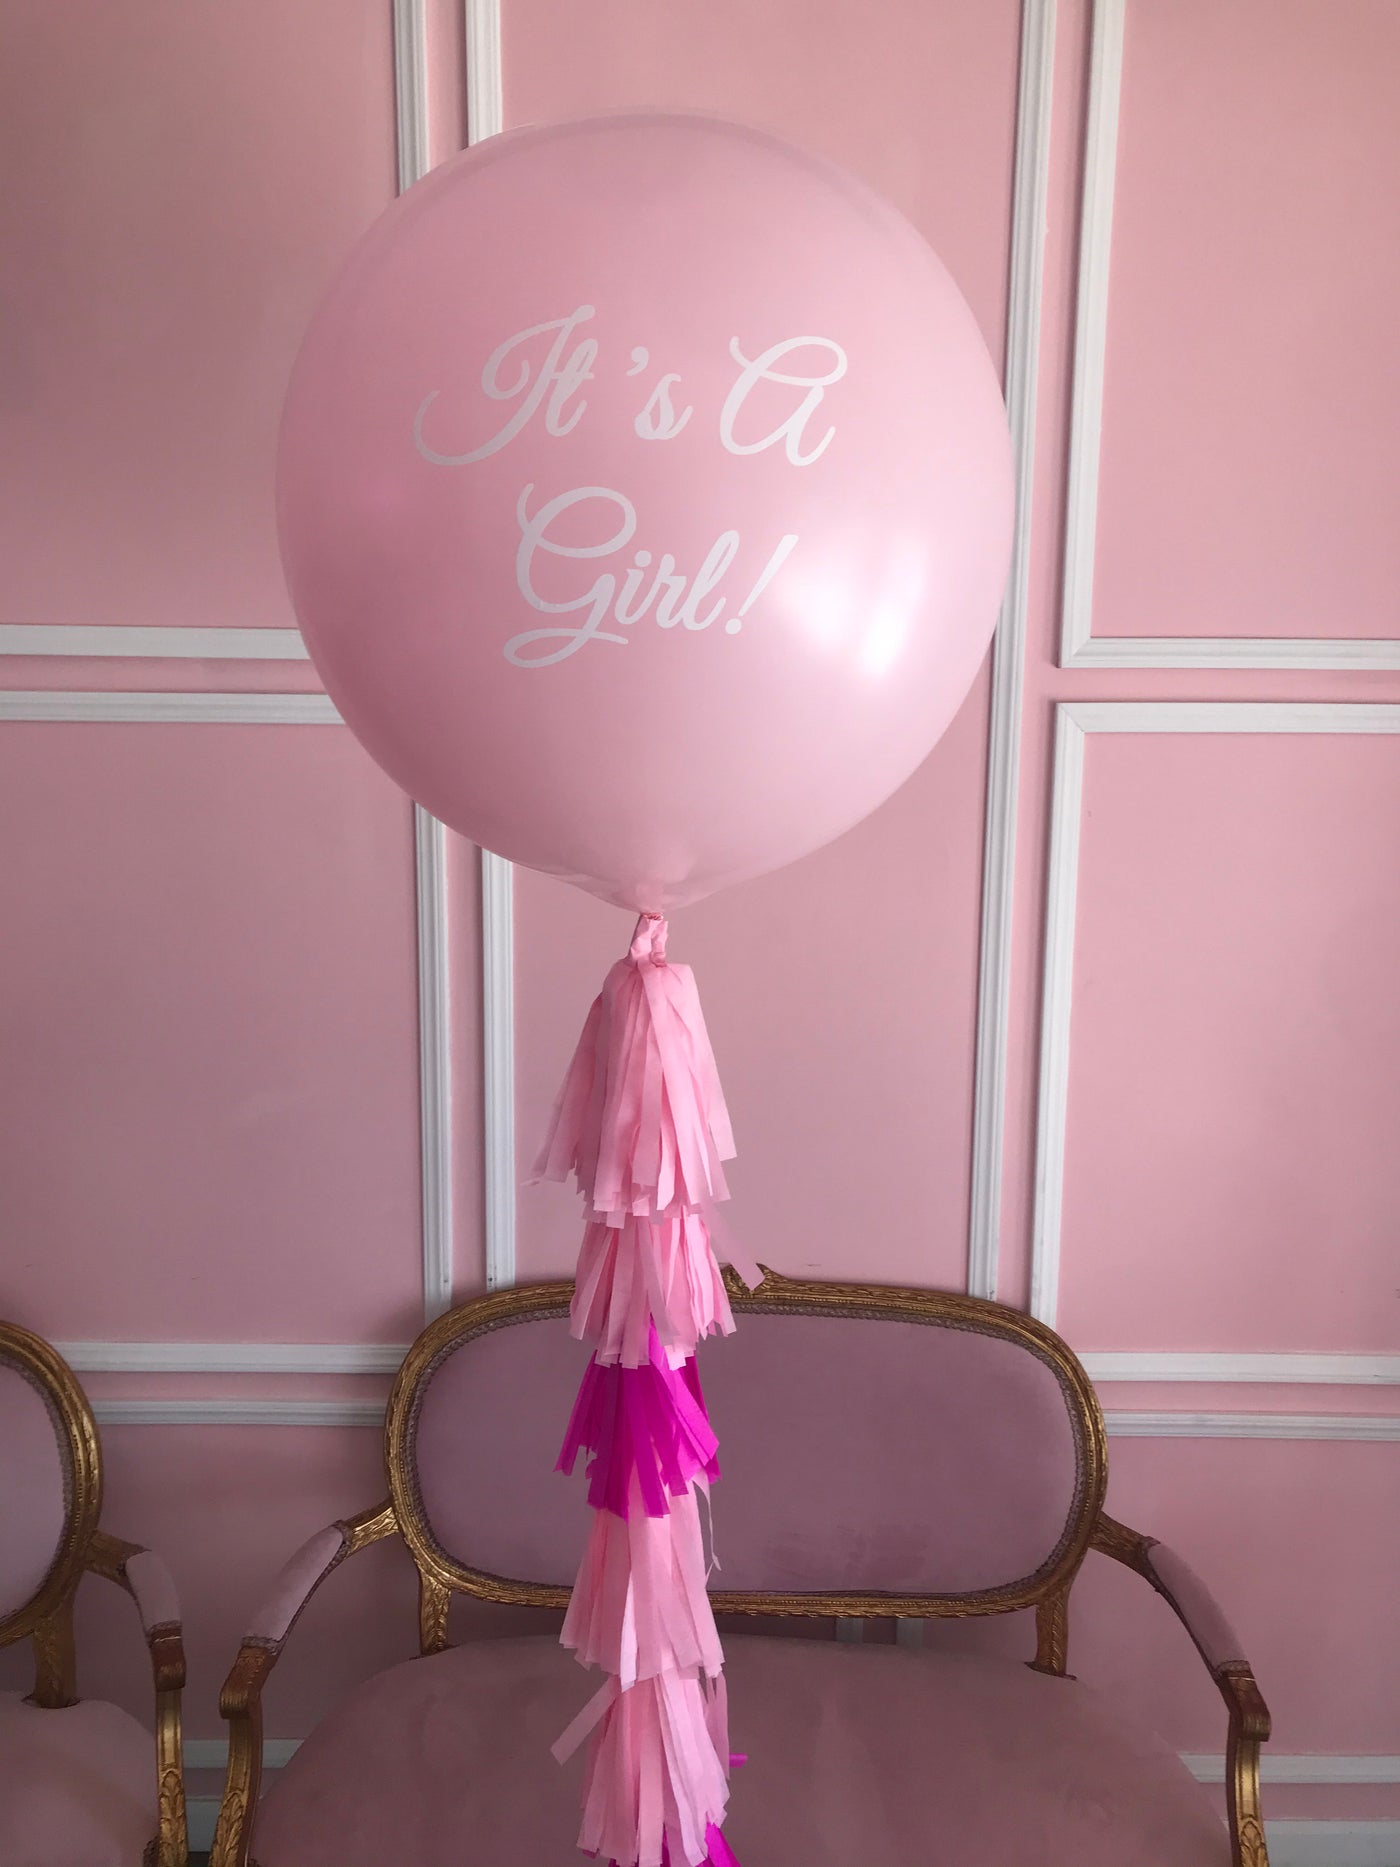 It's A Gril Balloon